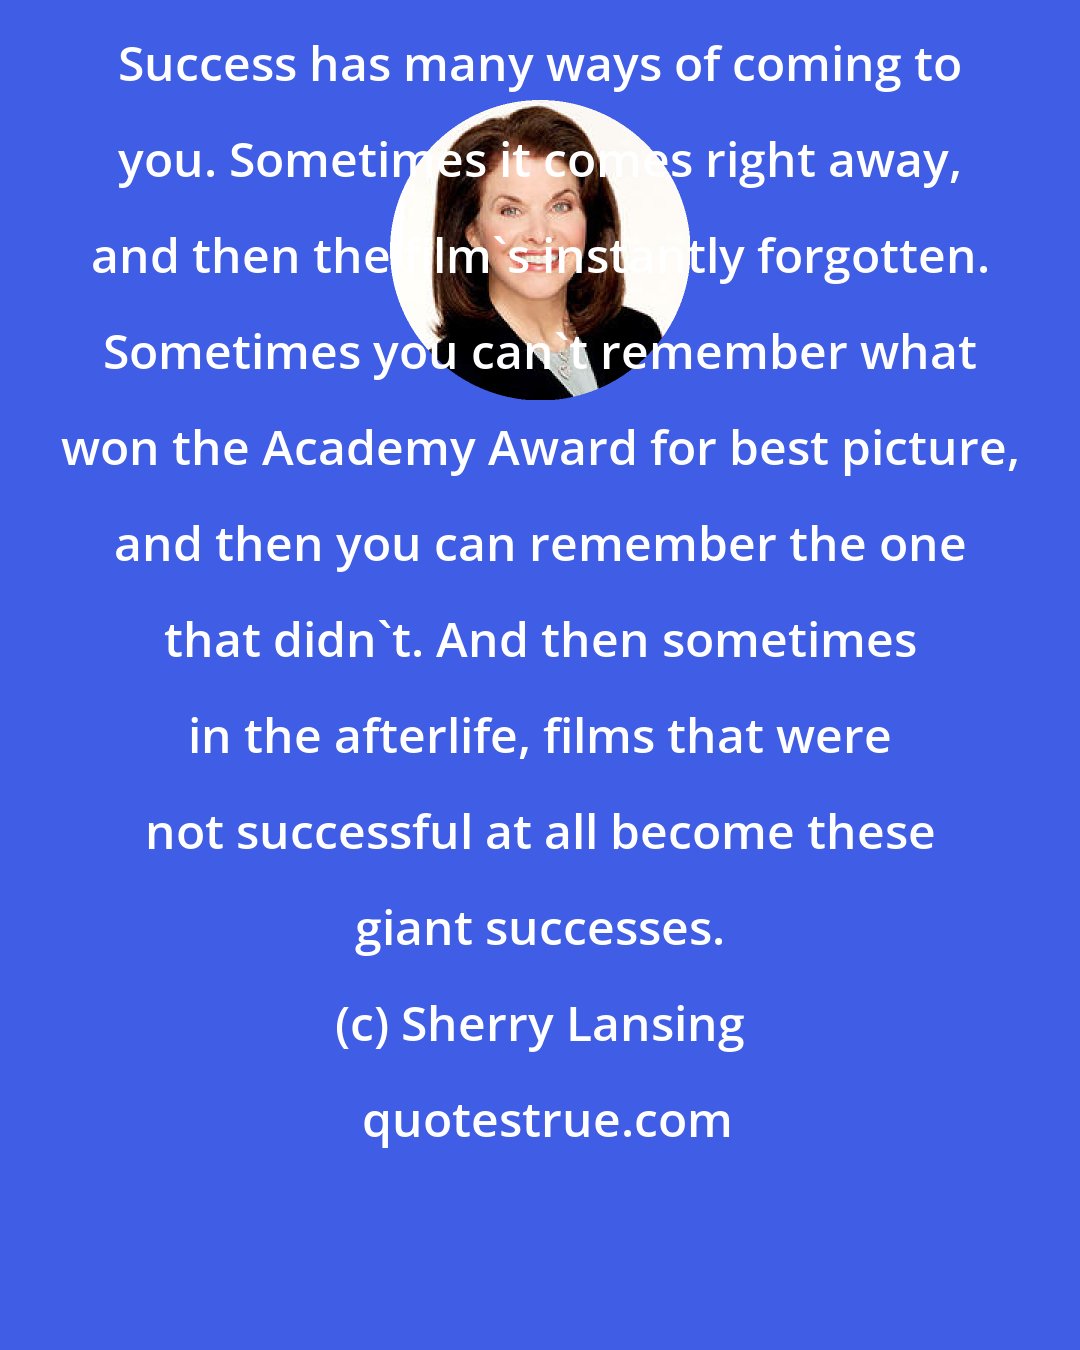 Sherry Lansing: Success has many ways of coming to you. Sometimes it comes right away, and then the film's instantly forgotten. Sometimes you can't remember what won the Academy Award for best picture, and then you can remember the one that didn't. And then sometimes in the afterlife, films that were not successful at all become these giant successes.